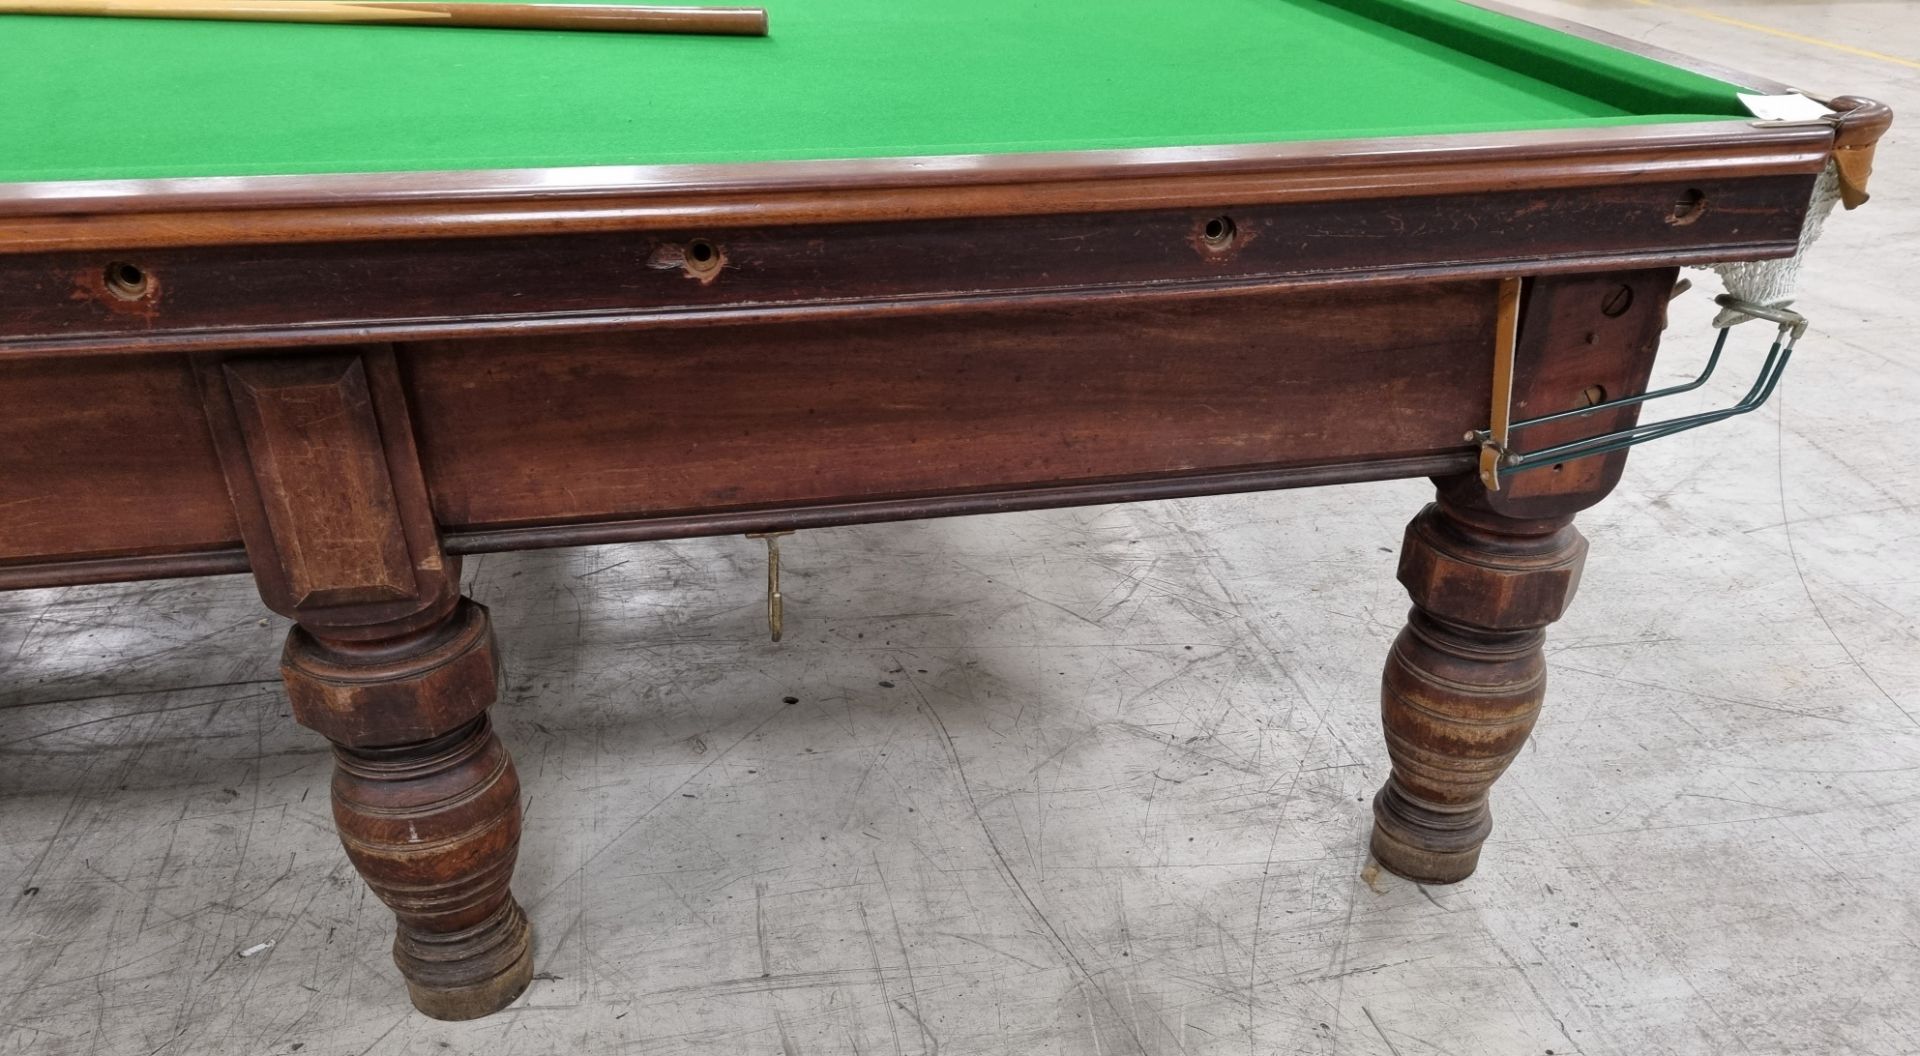 Orme & Sons Manchester 12ft snooker table with cues, cue rests, cover, and lighting - Image 8 of 25